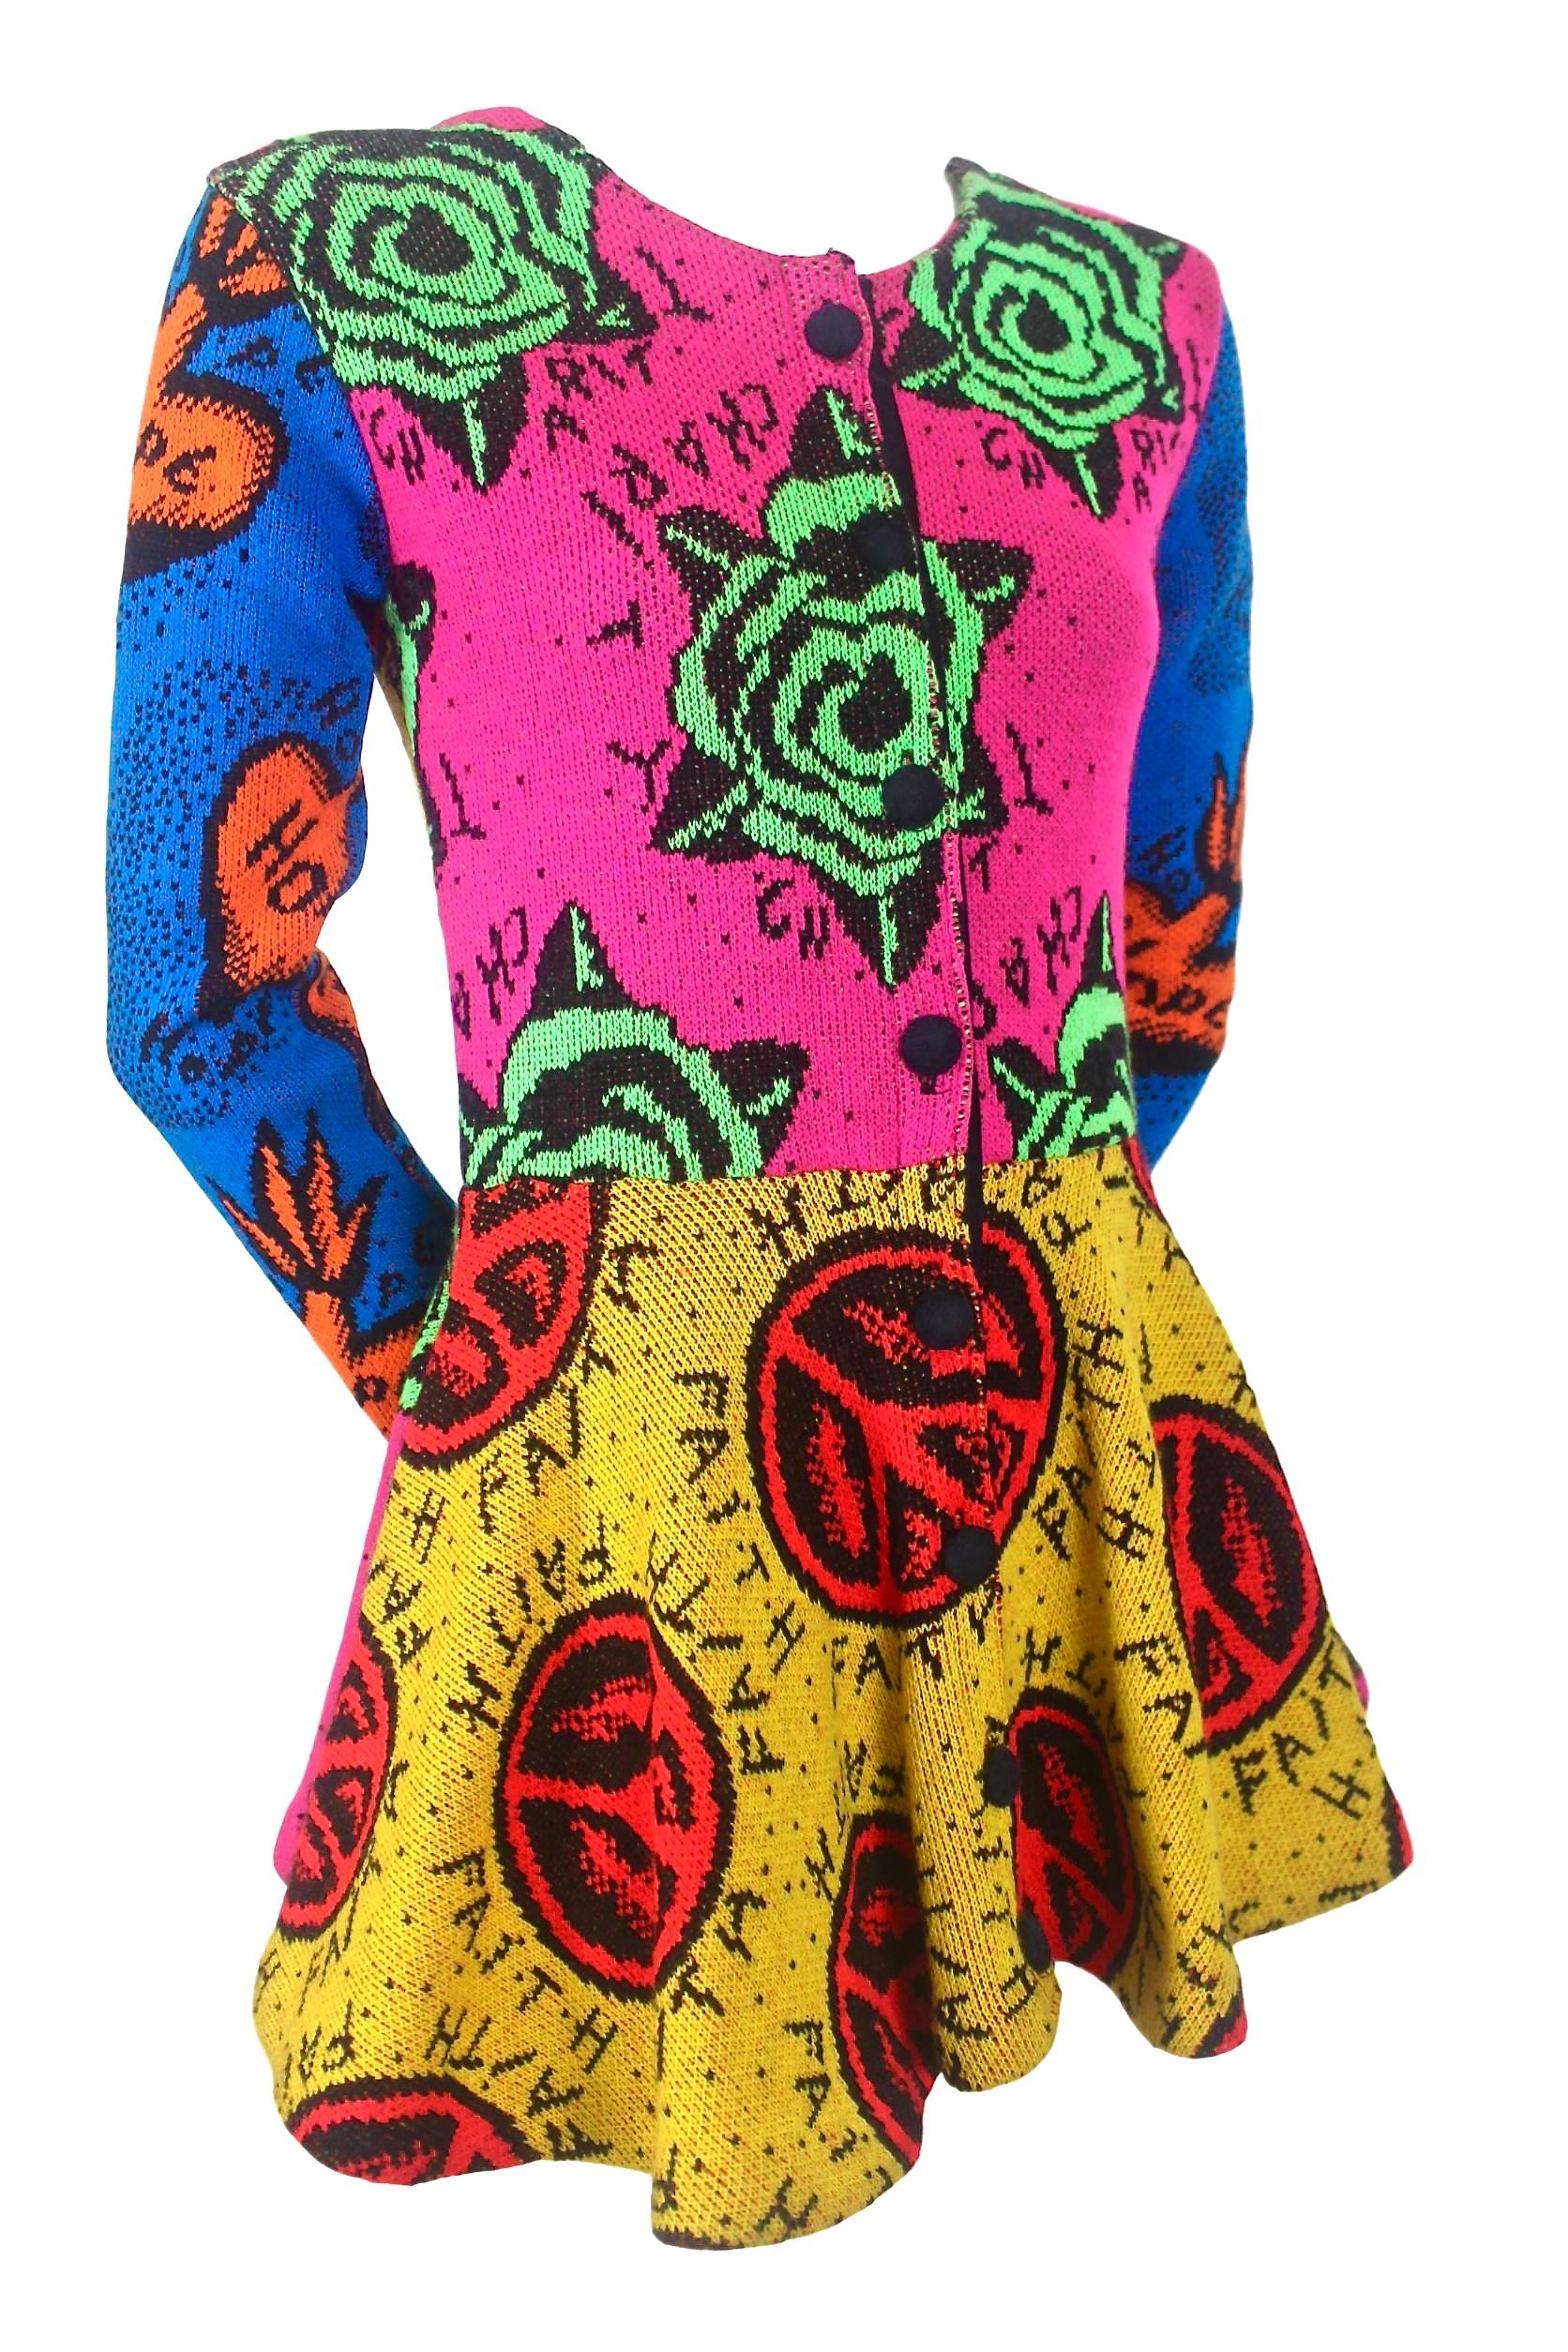 Women's Original Betsey Johnson Colourful Peplum Knit Jacket Faith, Hope and Charity For Sale